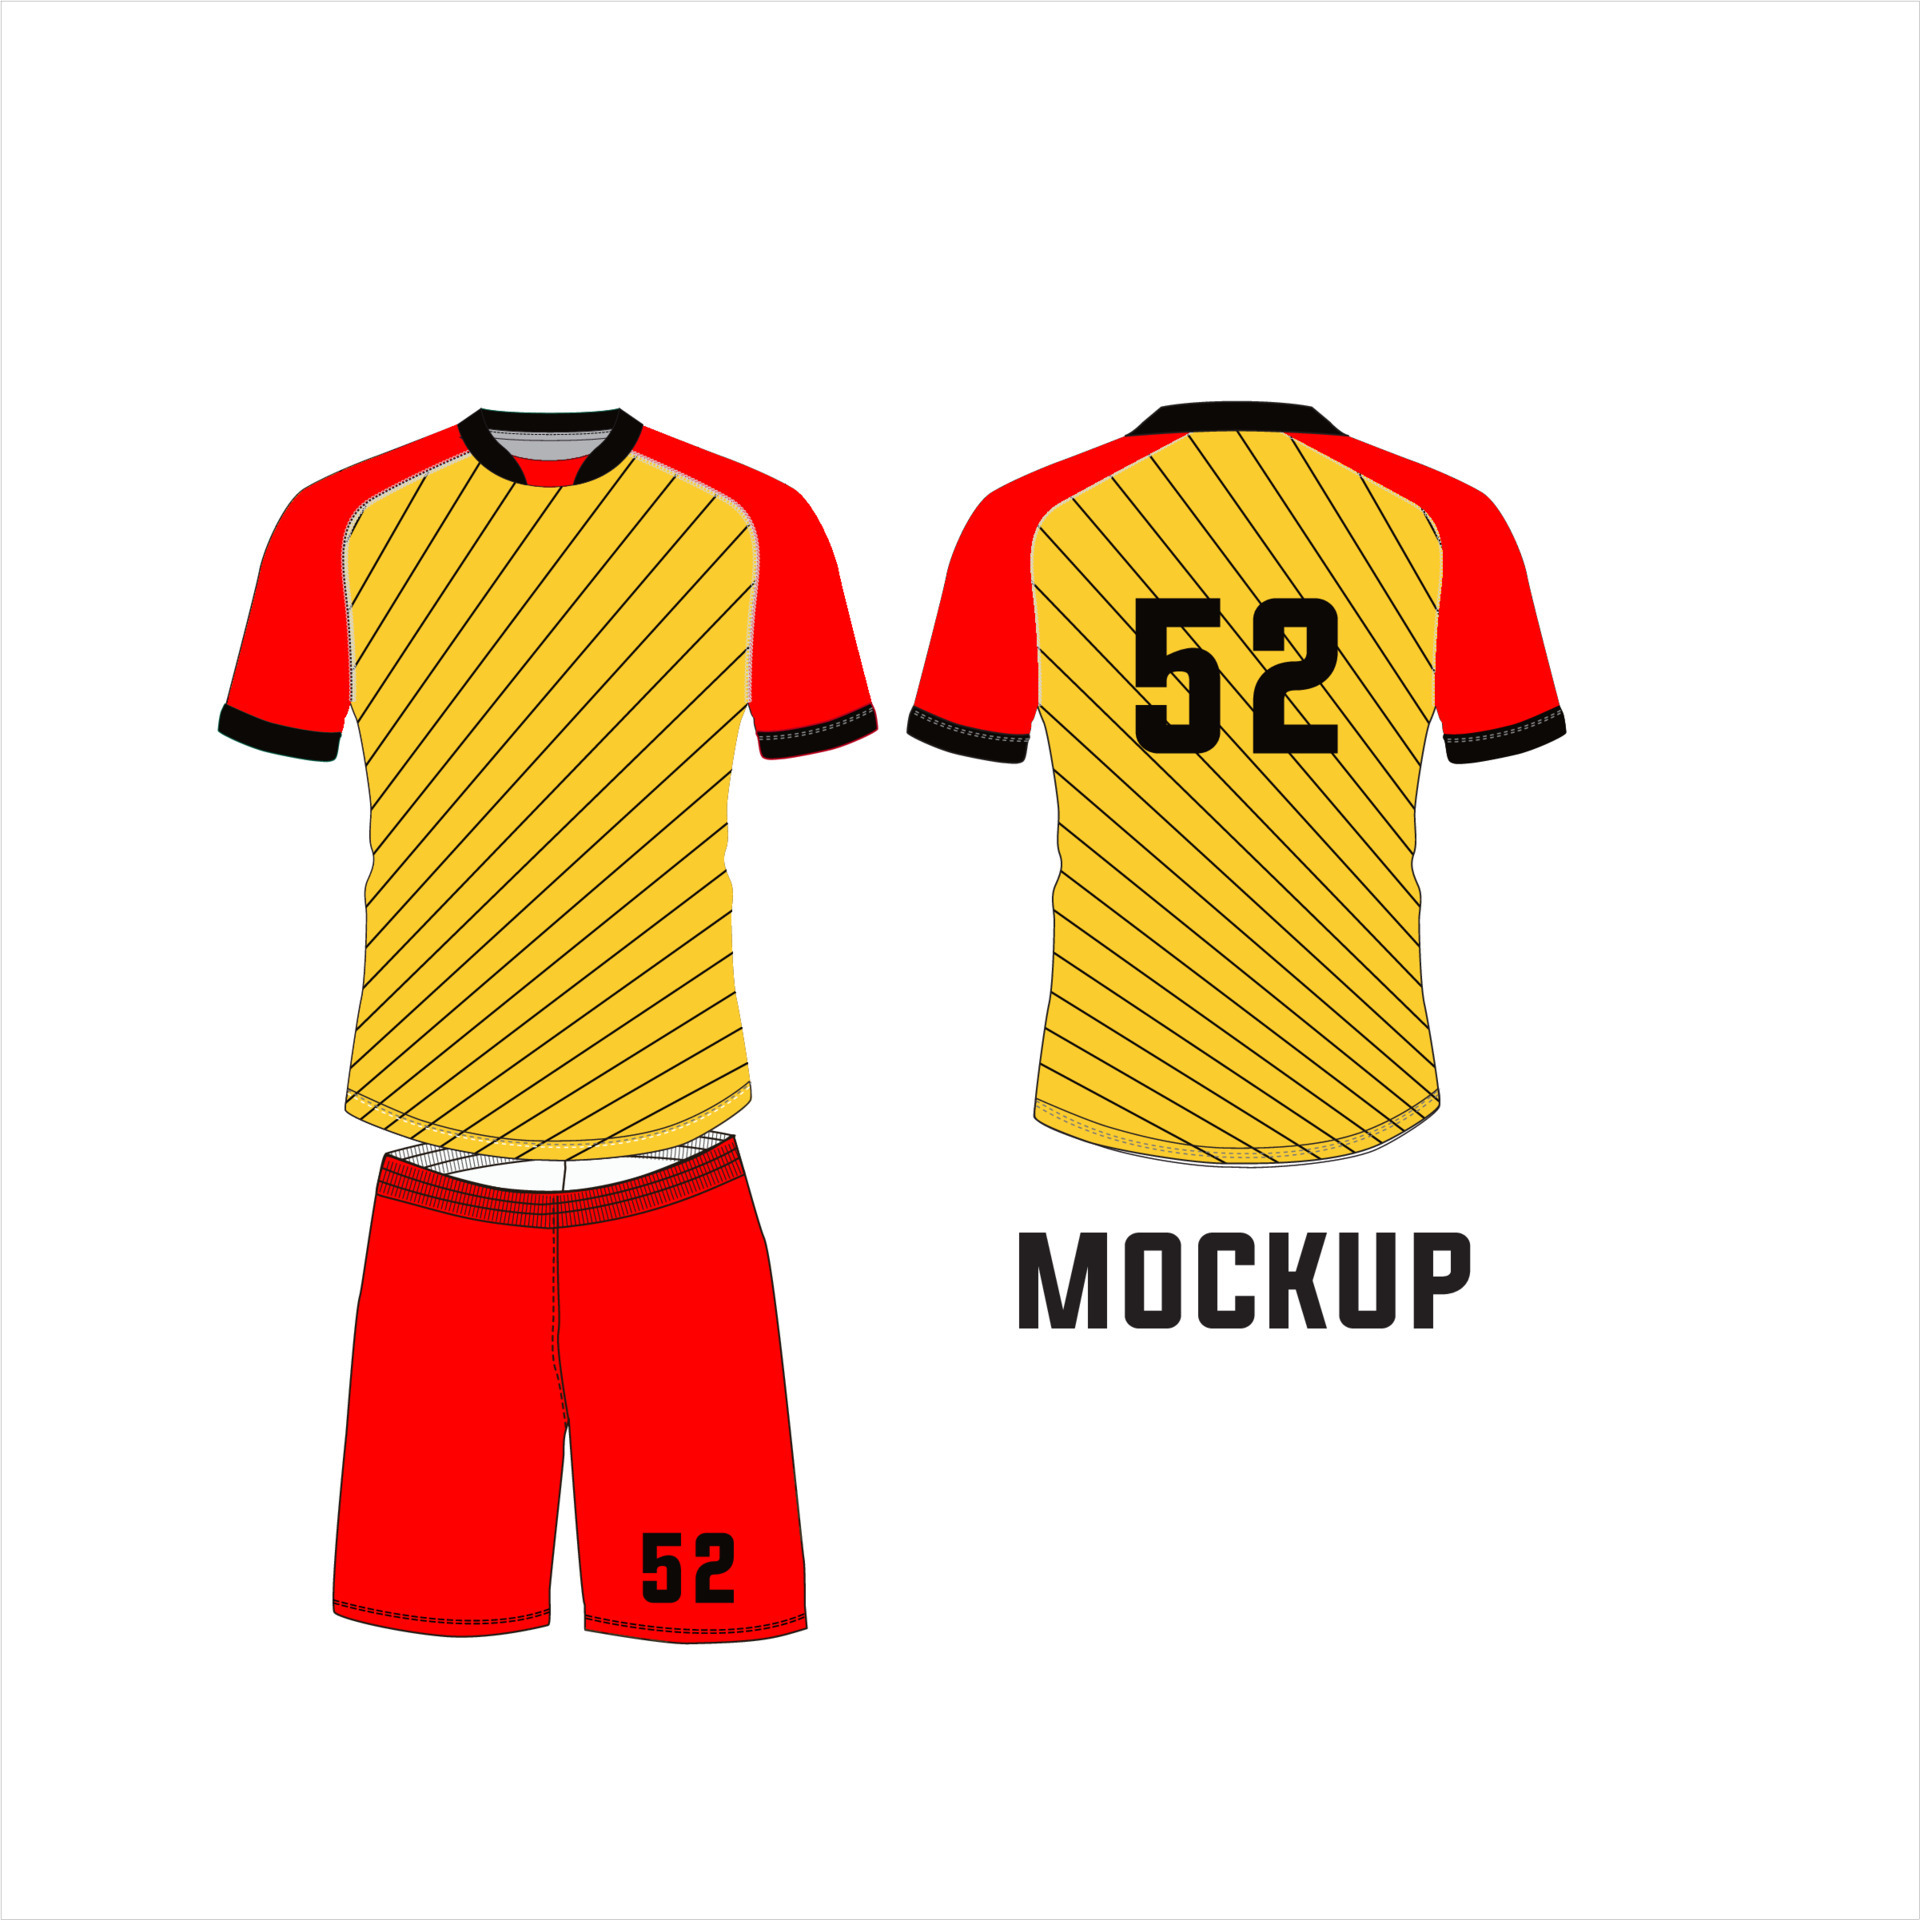 concept jersey